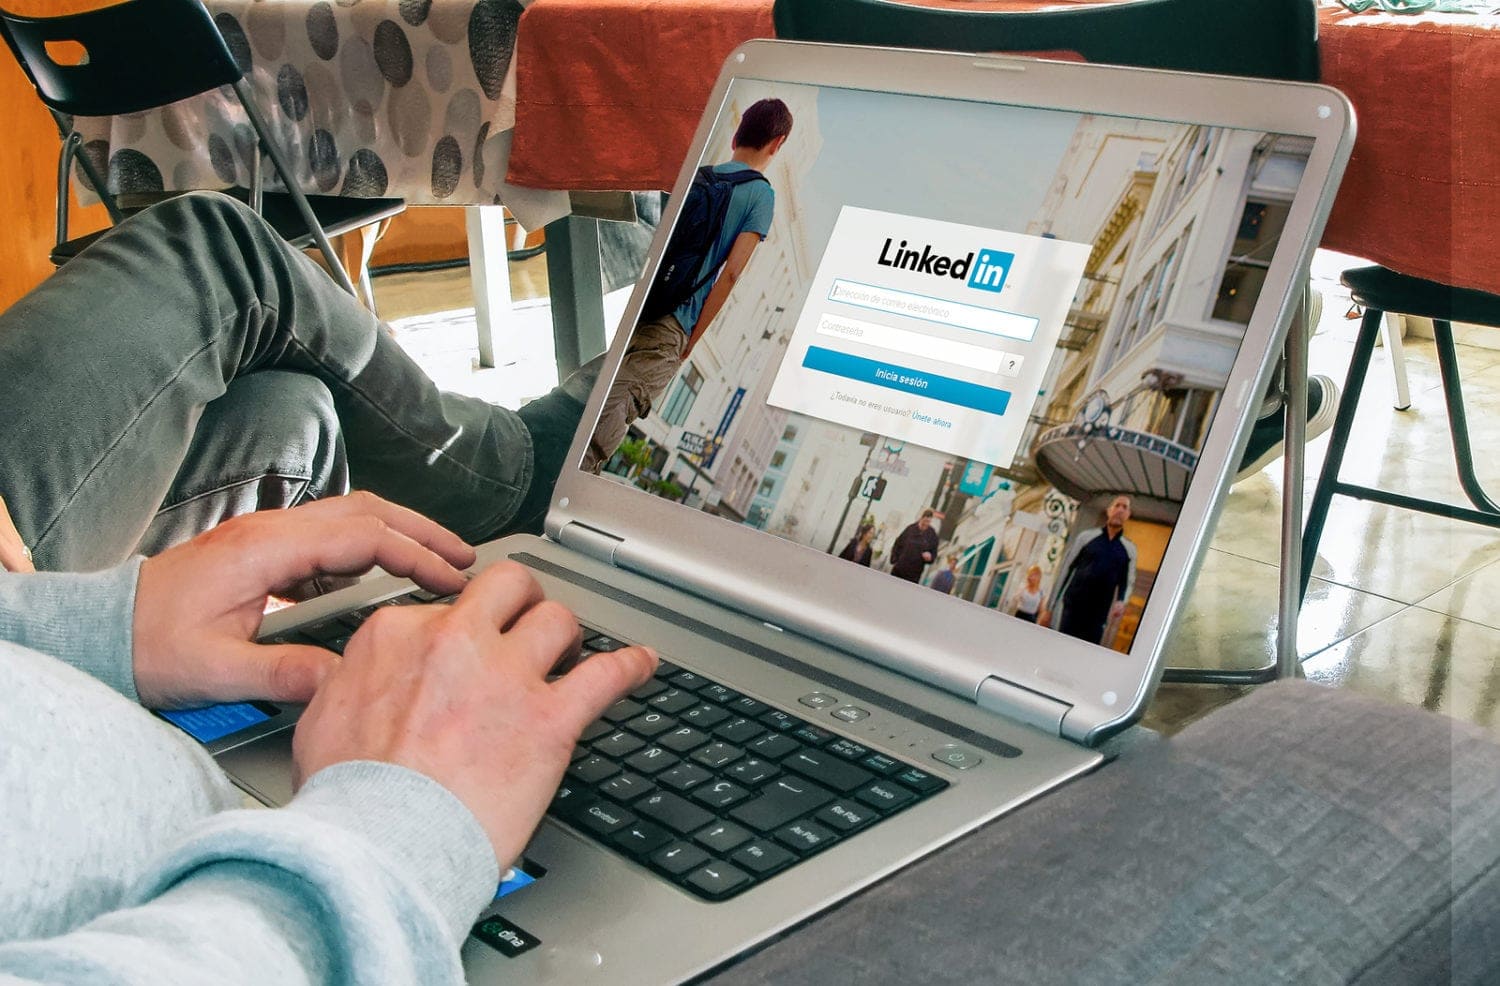 When did you last update LinkedIn with your current employment?